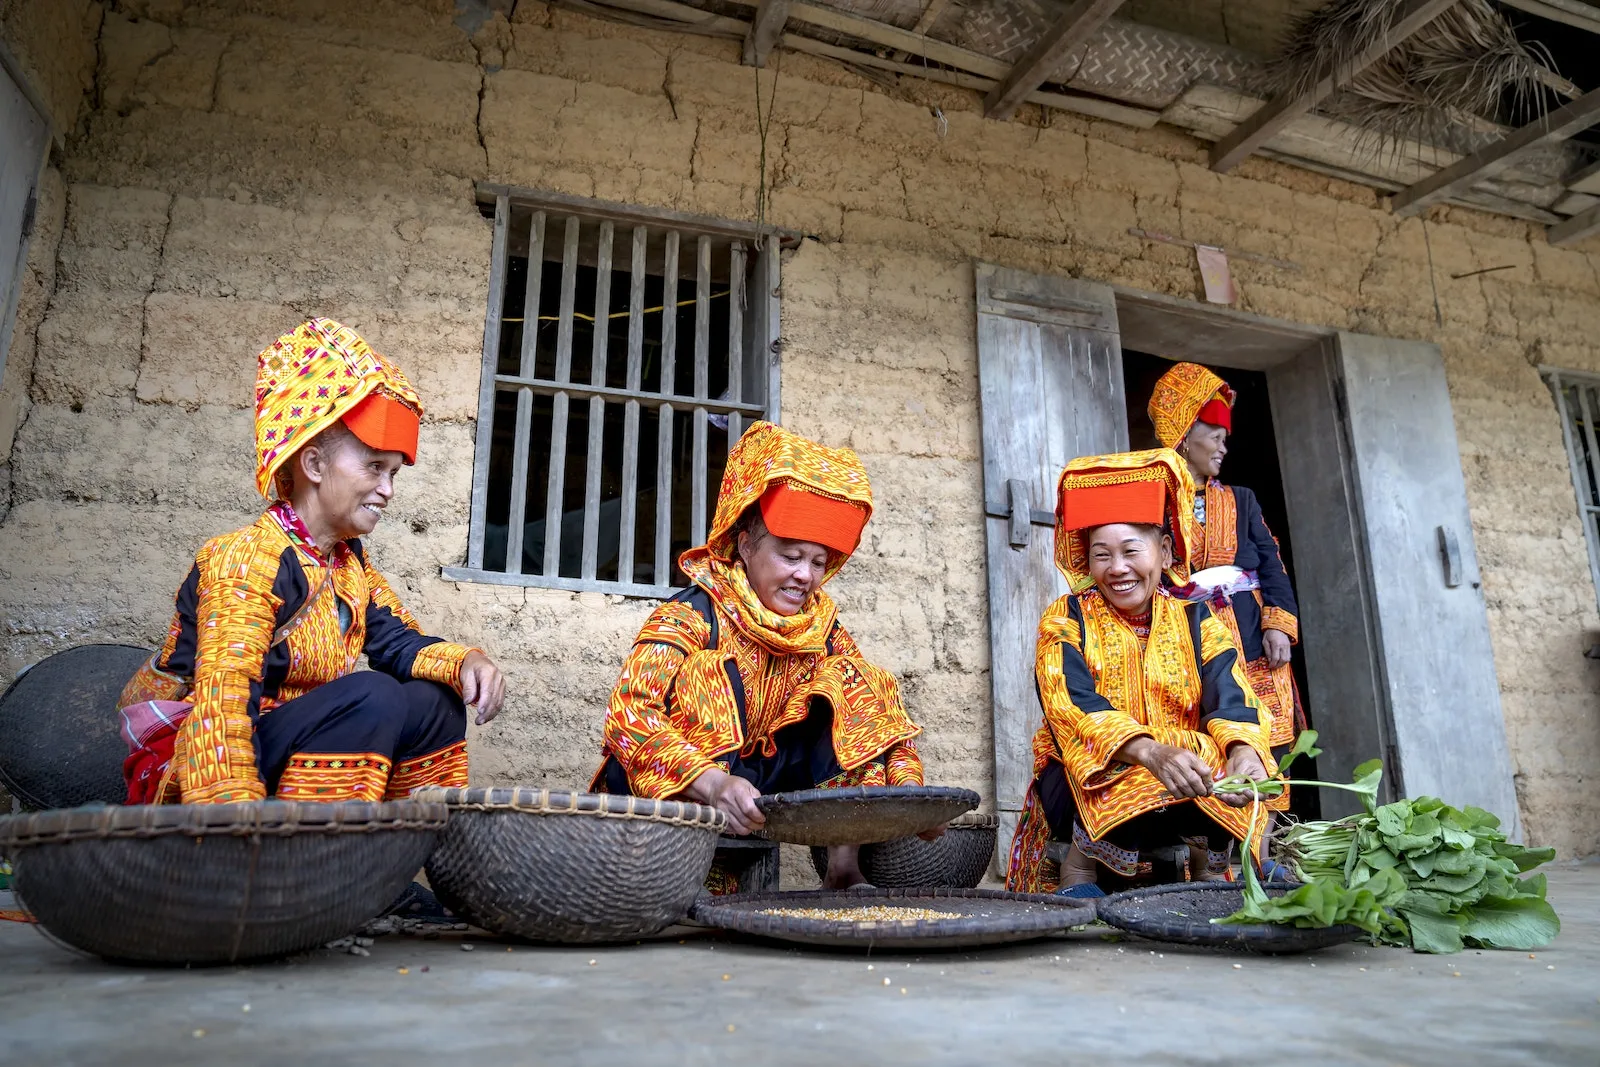 Women in Orange Traditional Clothes Working Outside a Rough Beige House